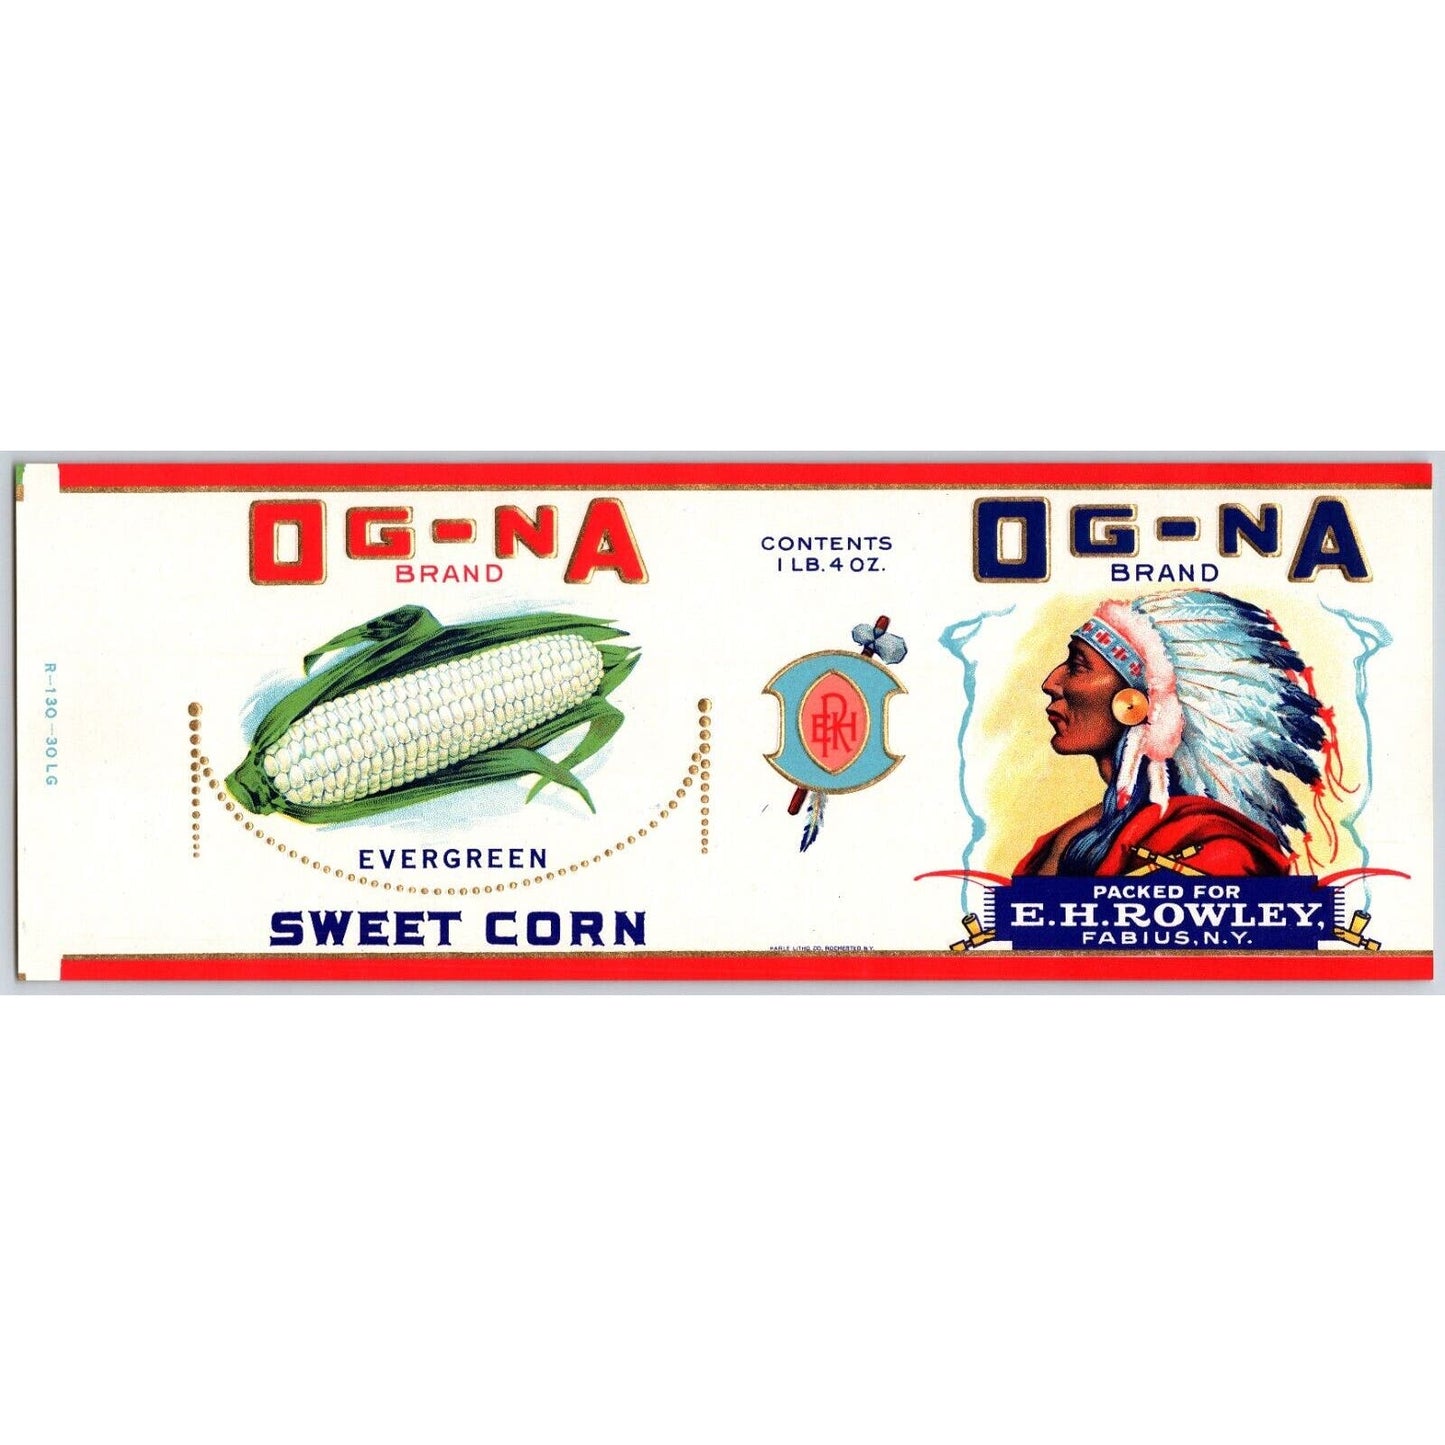 Og-Na Tomatoes Paper Can Label E. H. Rowley Fabius, NY Indian Chief c1920's-30's